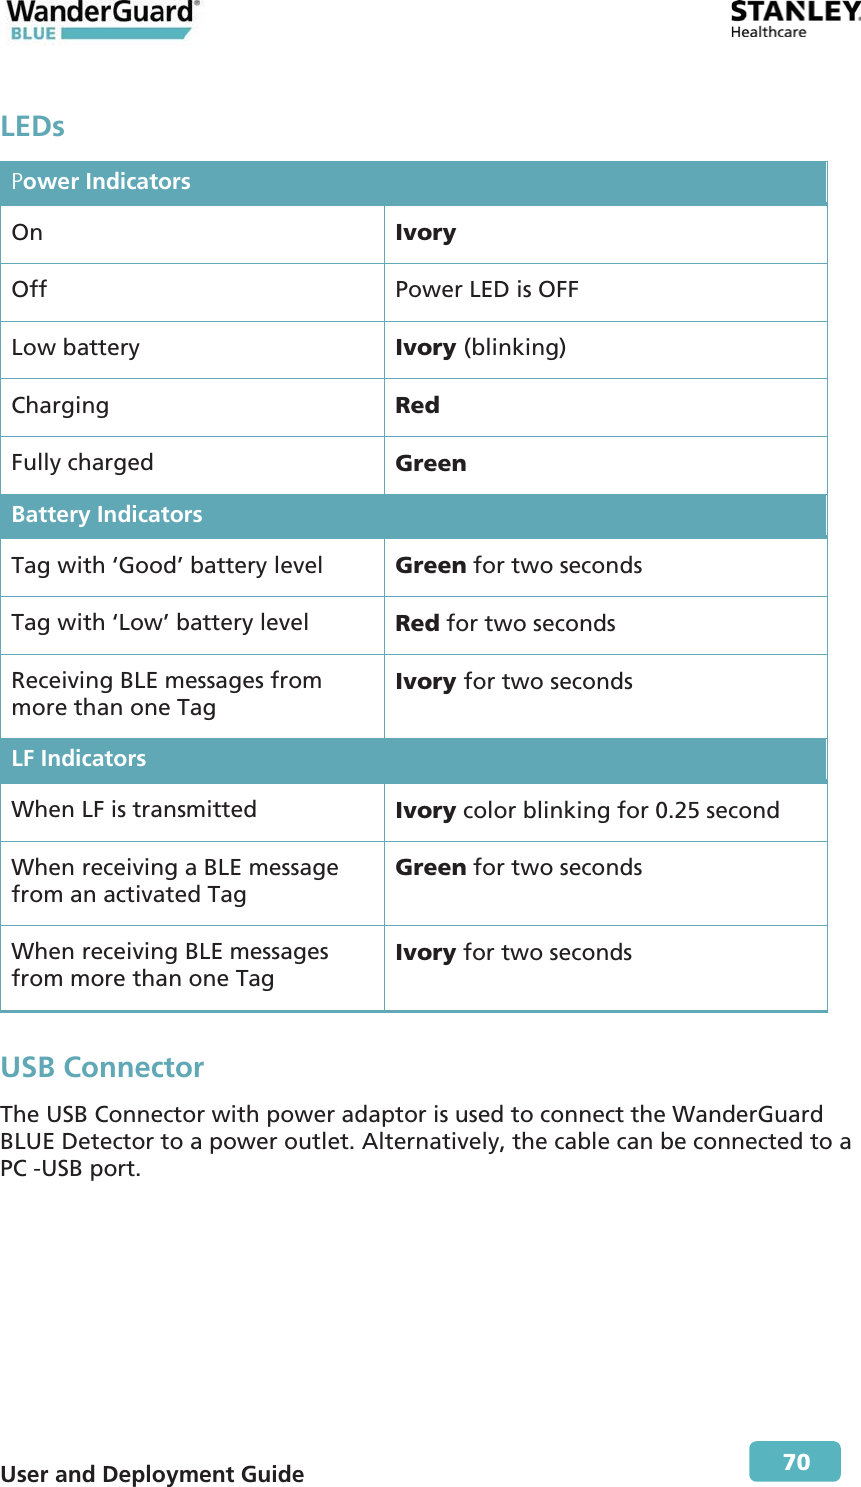  User and Deployment Guide        70 LEDs Power Indicators On  Ivory Off Power LED is OFF Low battery Ivory (blinking) Charging Red Fully charged Green Battery Indicators Tag with ‘Good’ battery level  Green for two seconds Tag with ‘Low’ battery level  Red for two seconds Receiving BLE messages from more than one Tag Ivory for two seconds LF Indicators When LF is transmitted  Ivory color blinking for 0.25 second When receiving a BLE message from an activated Tag Green for two seconds When receiving BLE messages from more than one Tag Ivory for two seconds USB Connector The USB Connector with power adaptor is used to connect the WanderGuard BLUE Detector to a power outlet. Alternatively, the cable can be connected to a PC -USB port. 